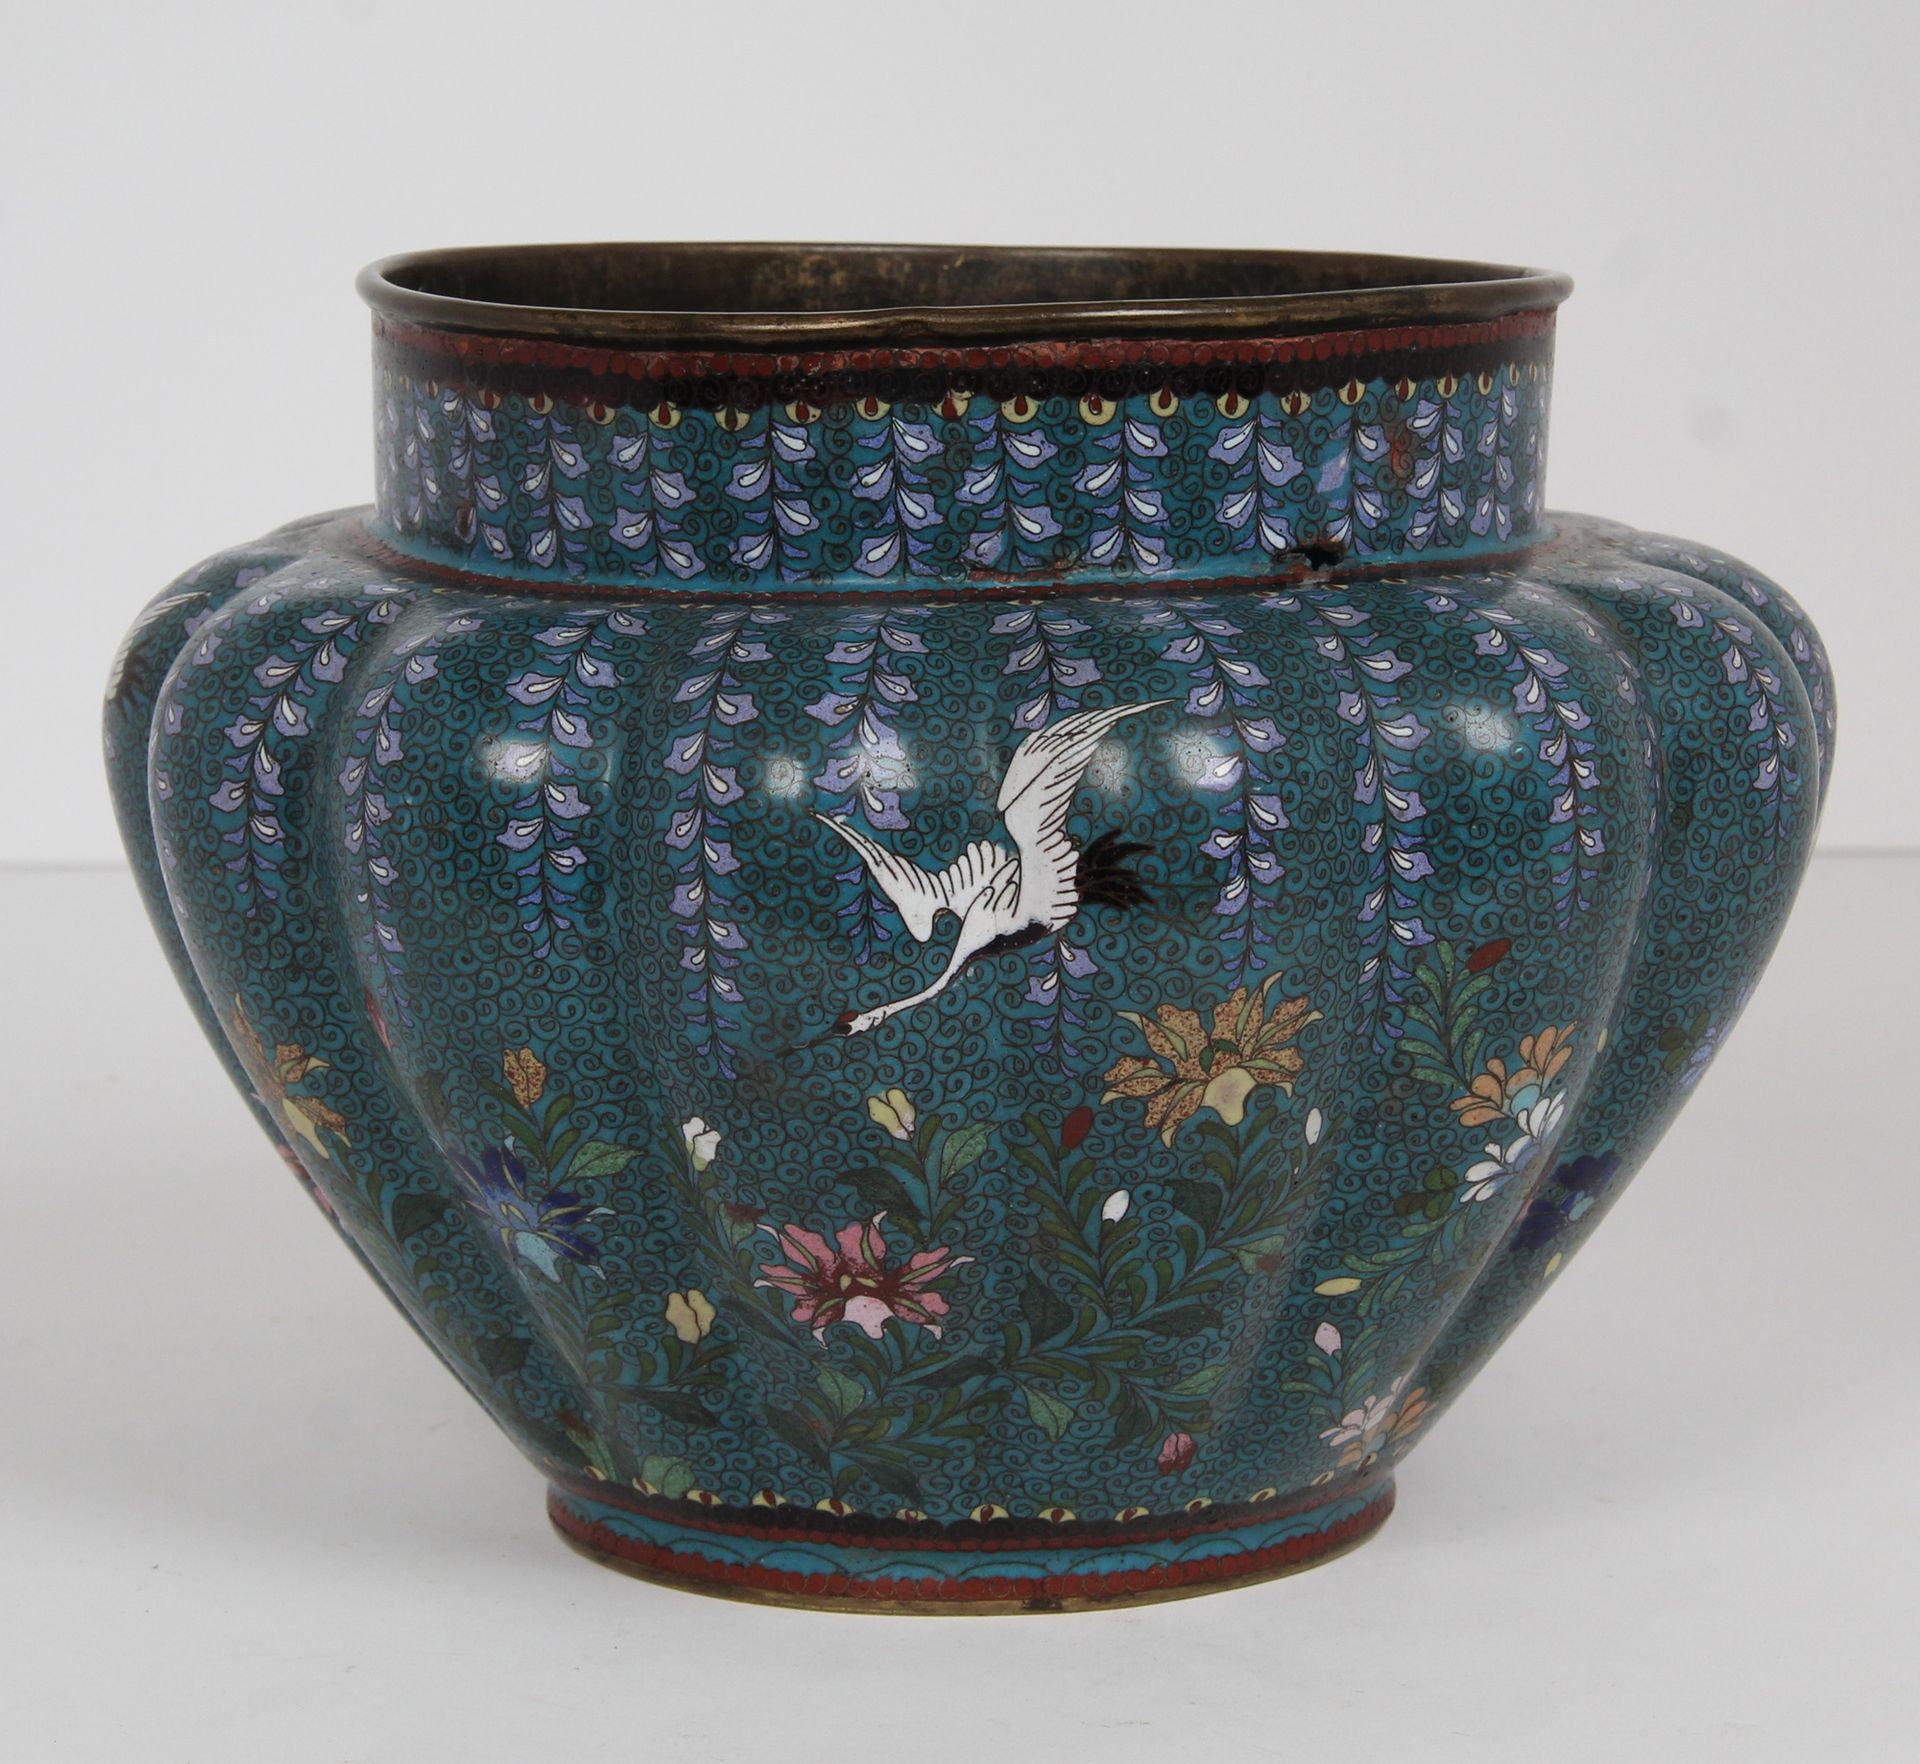 Null Japan, late 19th century

Copper and polychrome cloisonné enamel vase with &hellip;